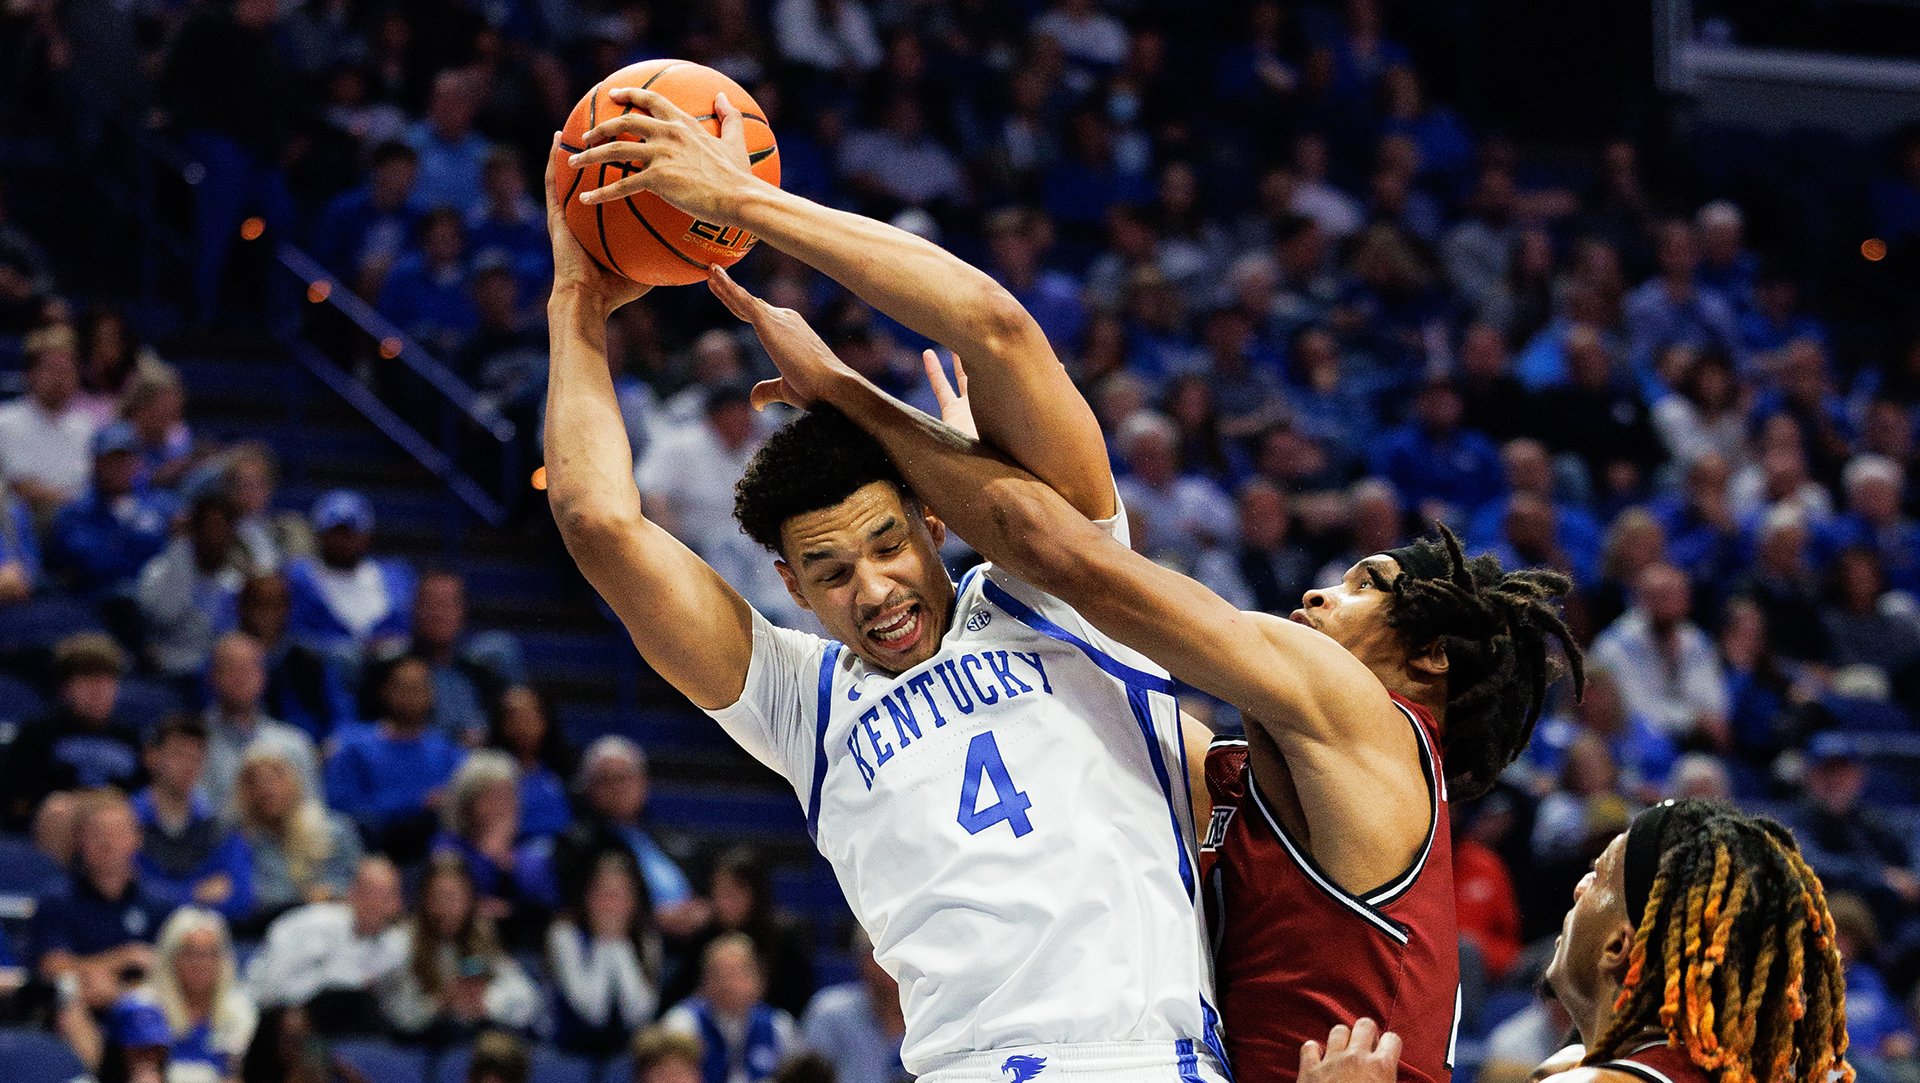 Highlights: Kentucky 86, New Mexico State 46